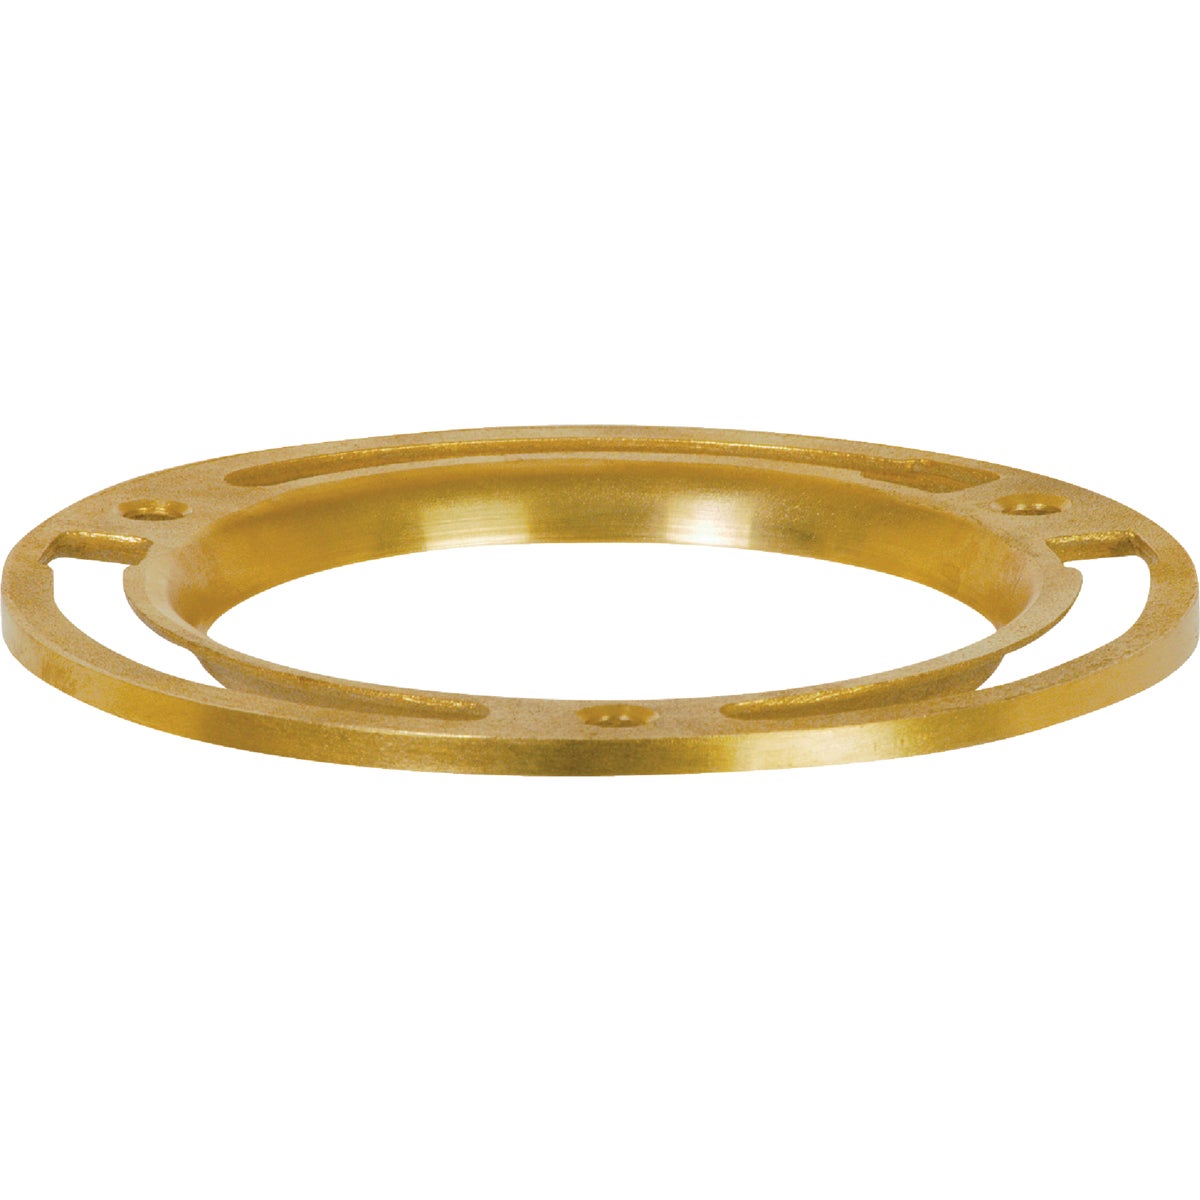 Item 404119, 4 In. solid brass closet flange ring.